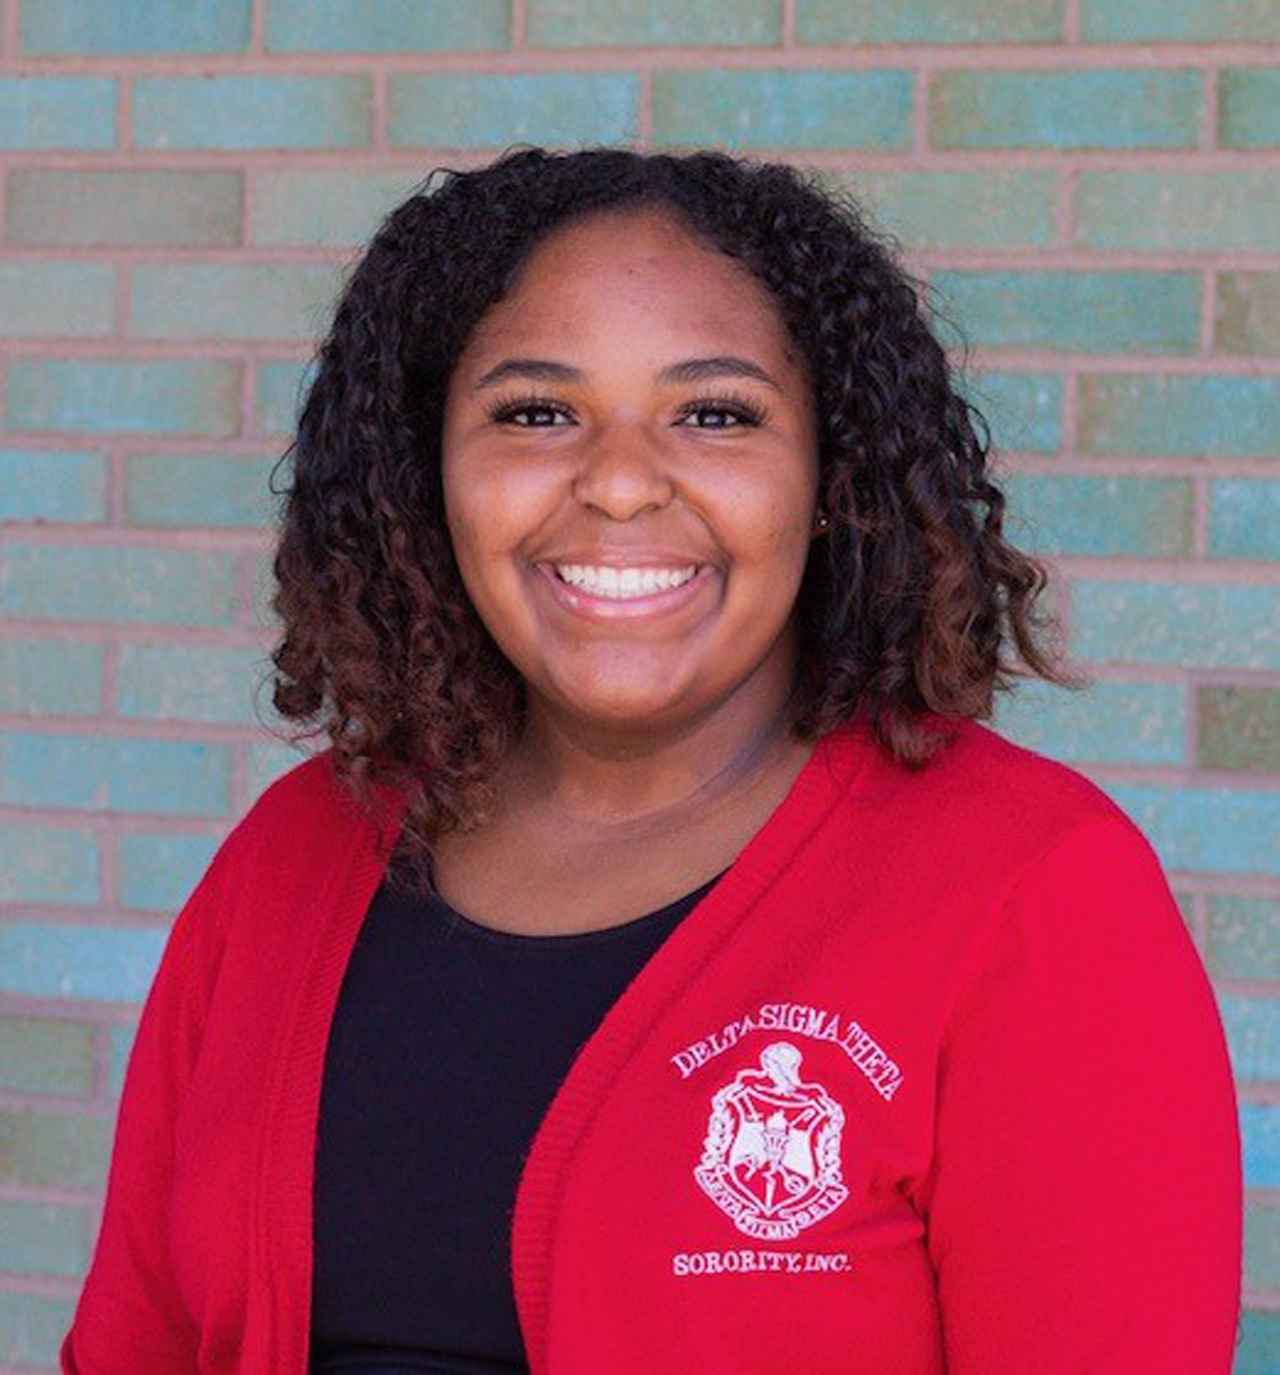 Jade McGhee stands in front of a brick wall in a red Delta Sigma Theta jacket